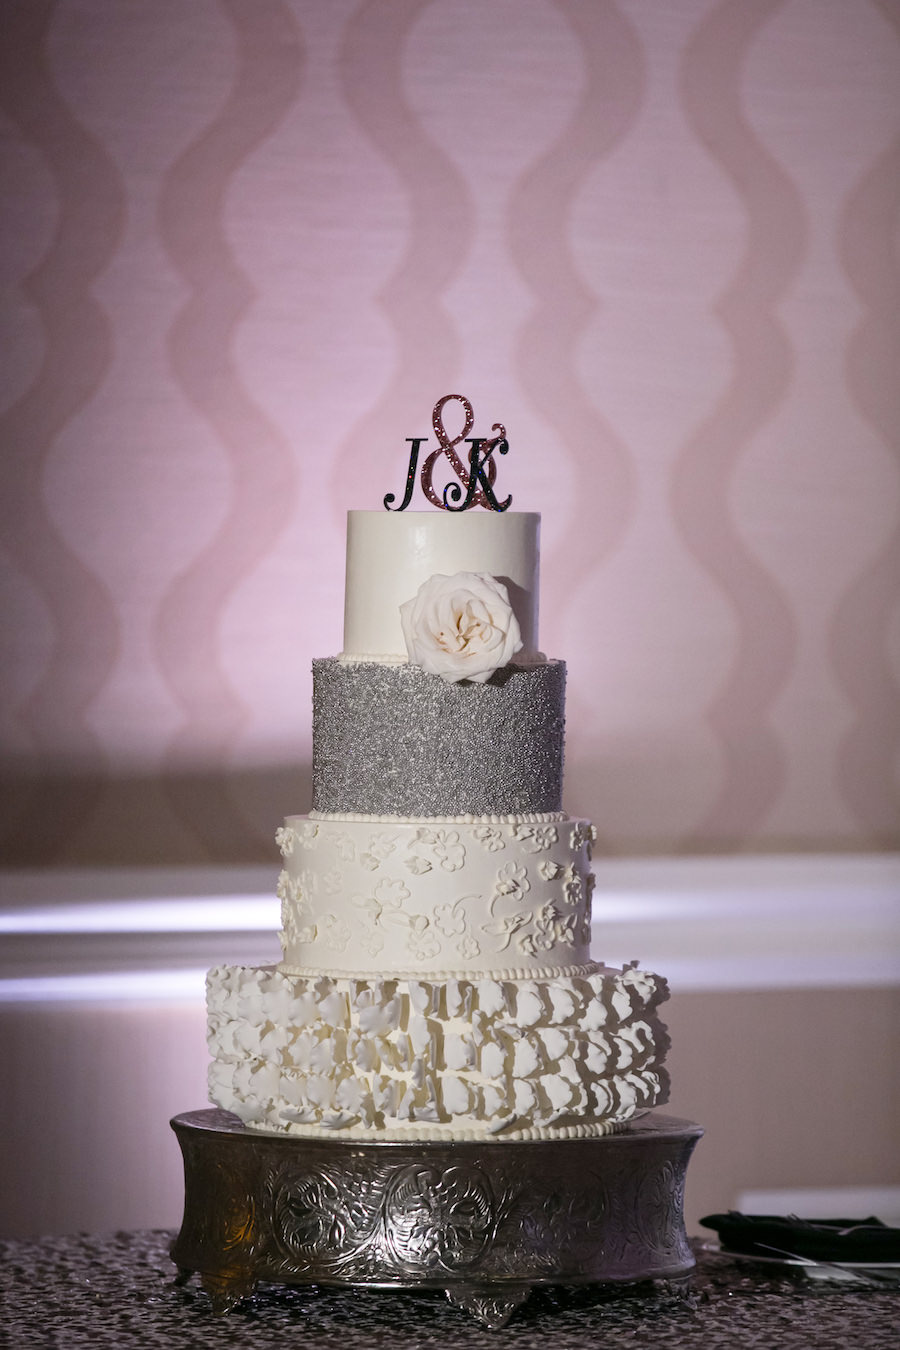 Four Tier Round White, Sparkly Wedding Cake with Silver Glitter and Floral Detail for New Year’s Eve Wedding | Black, Blush Pink, Silver Wedding Ideas | St. Petersburg Wedding Photographer Carrie Wildes Photography | Cake by Downtown St. Pete Vinoy Renaissance